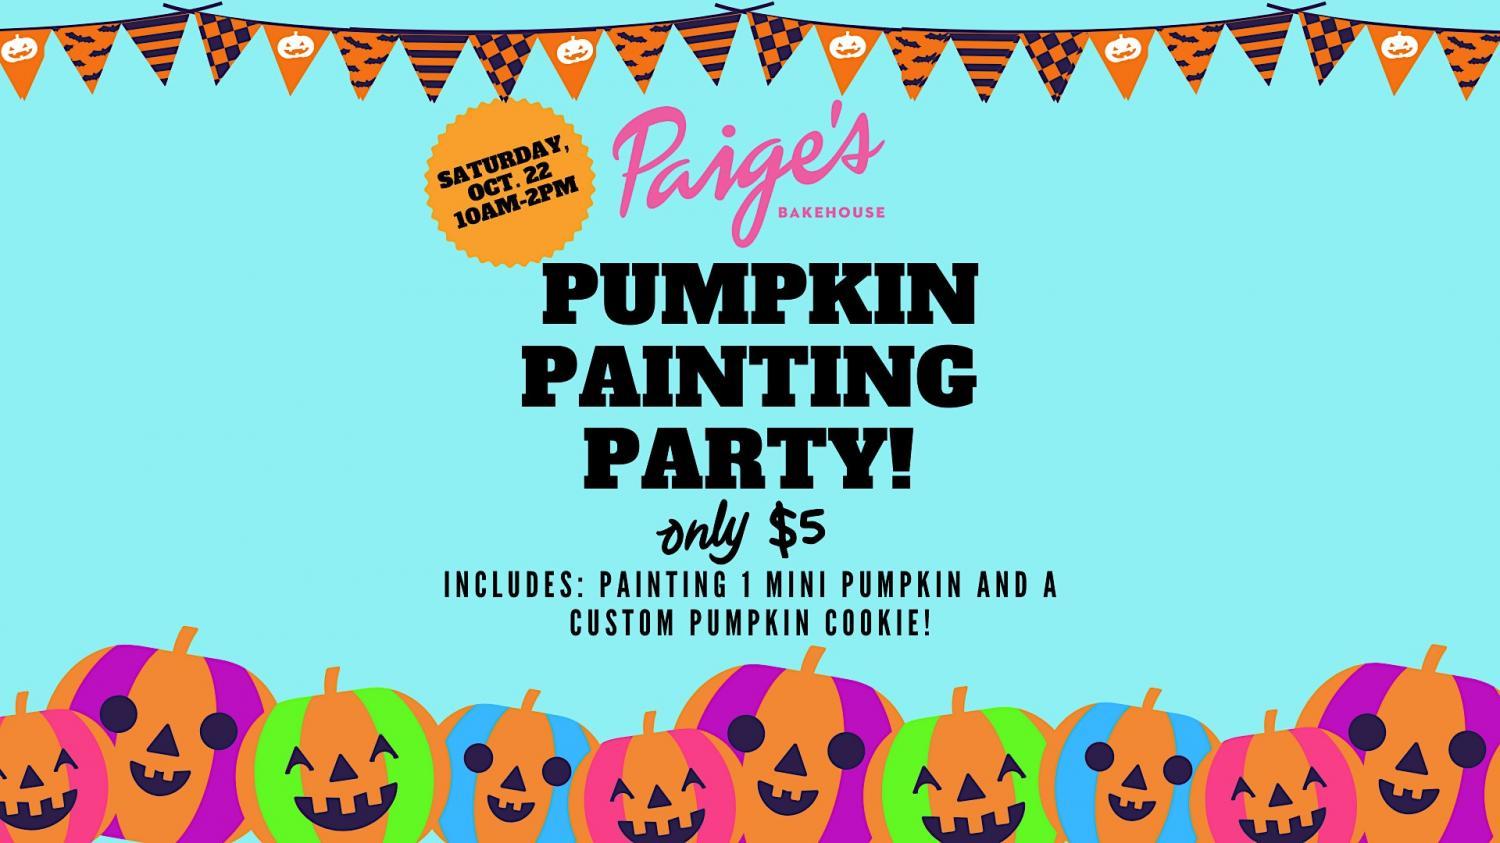 Pumpkin Painting Party @ Paige's Bakehouse
Sat Oct 22, 10:00 AM - Sat Oct 22, 7:00 PM
in 2 days